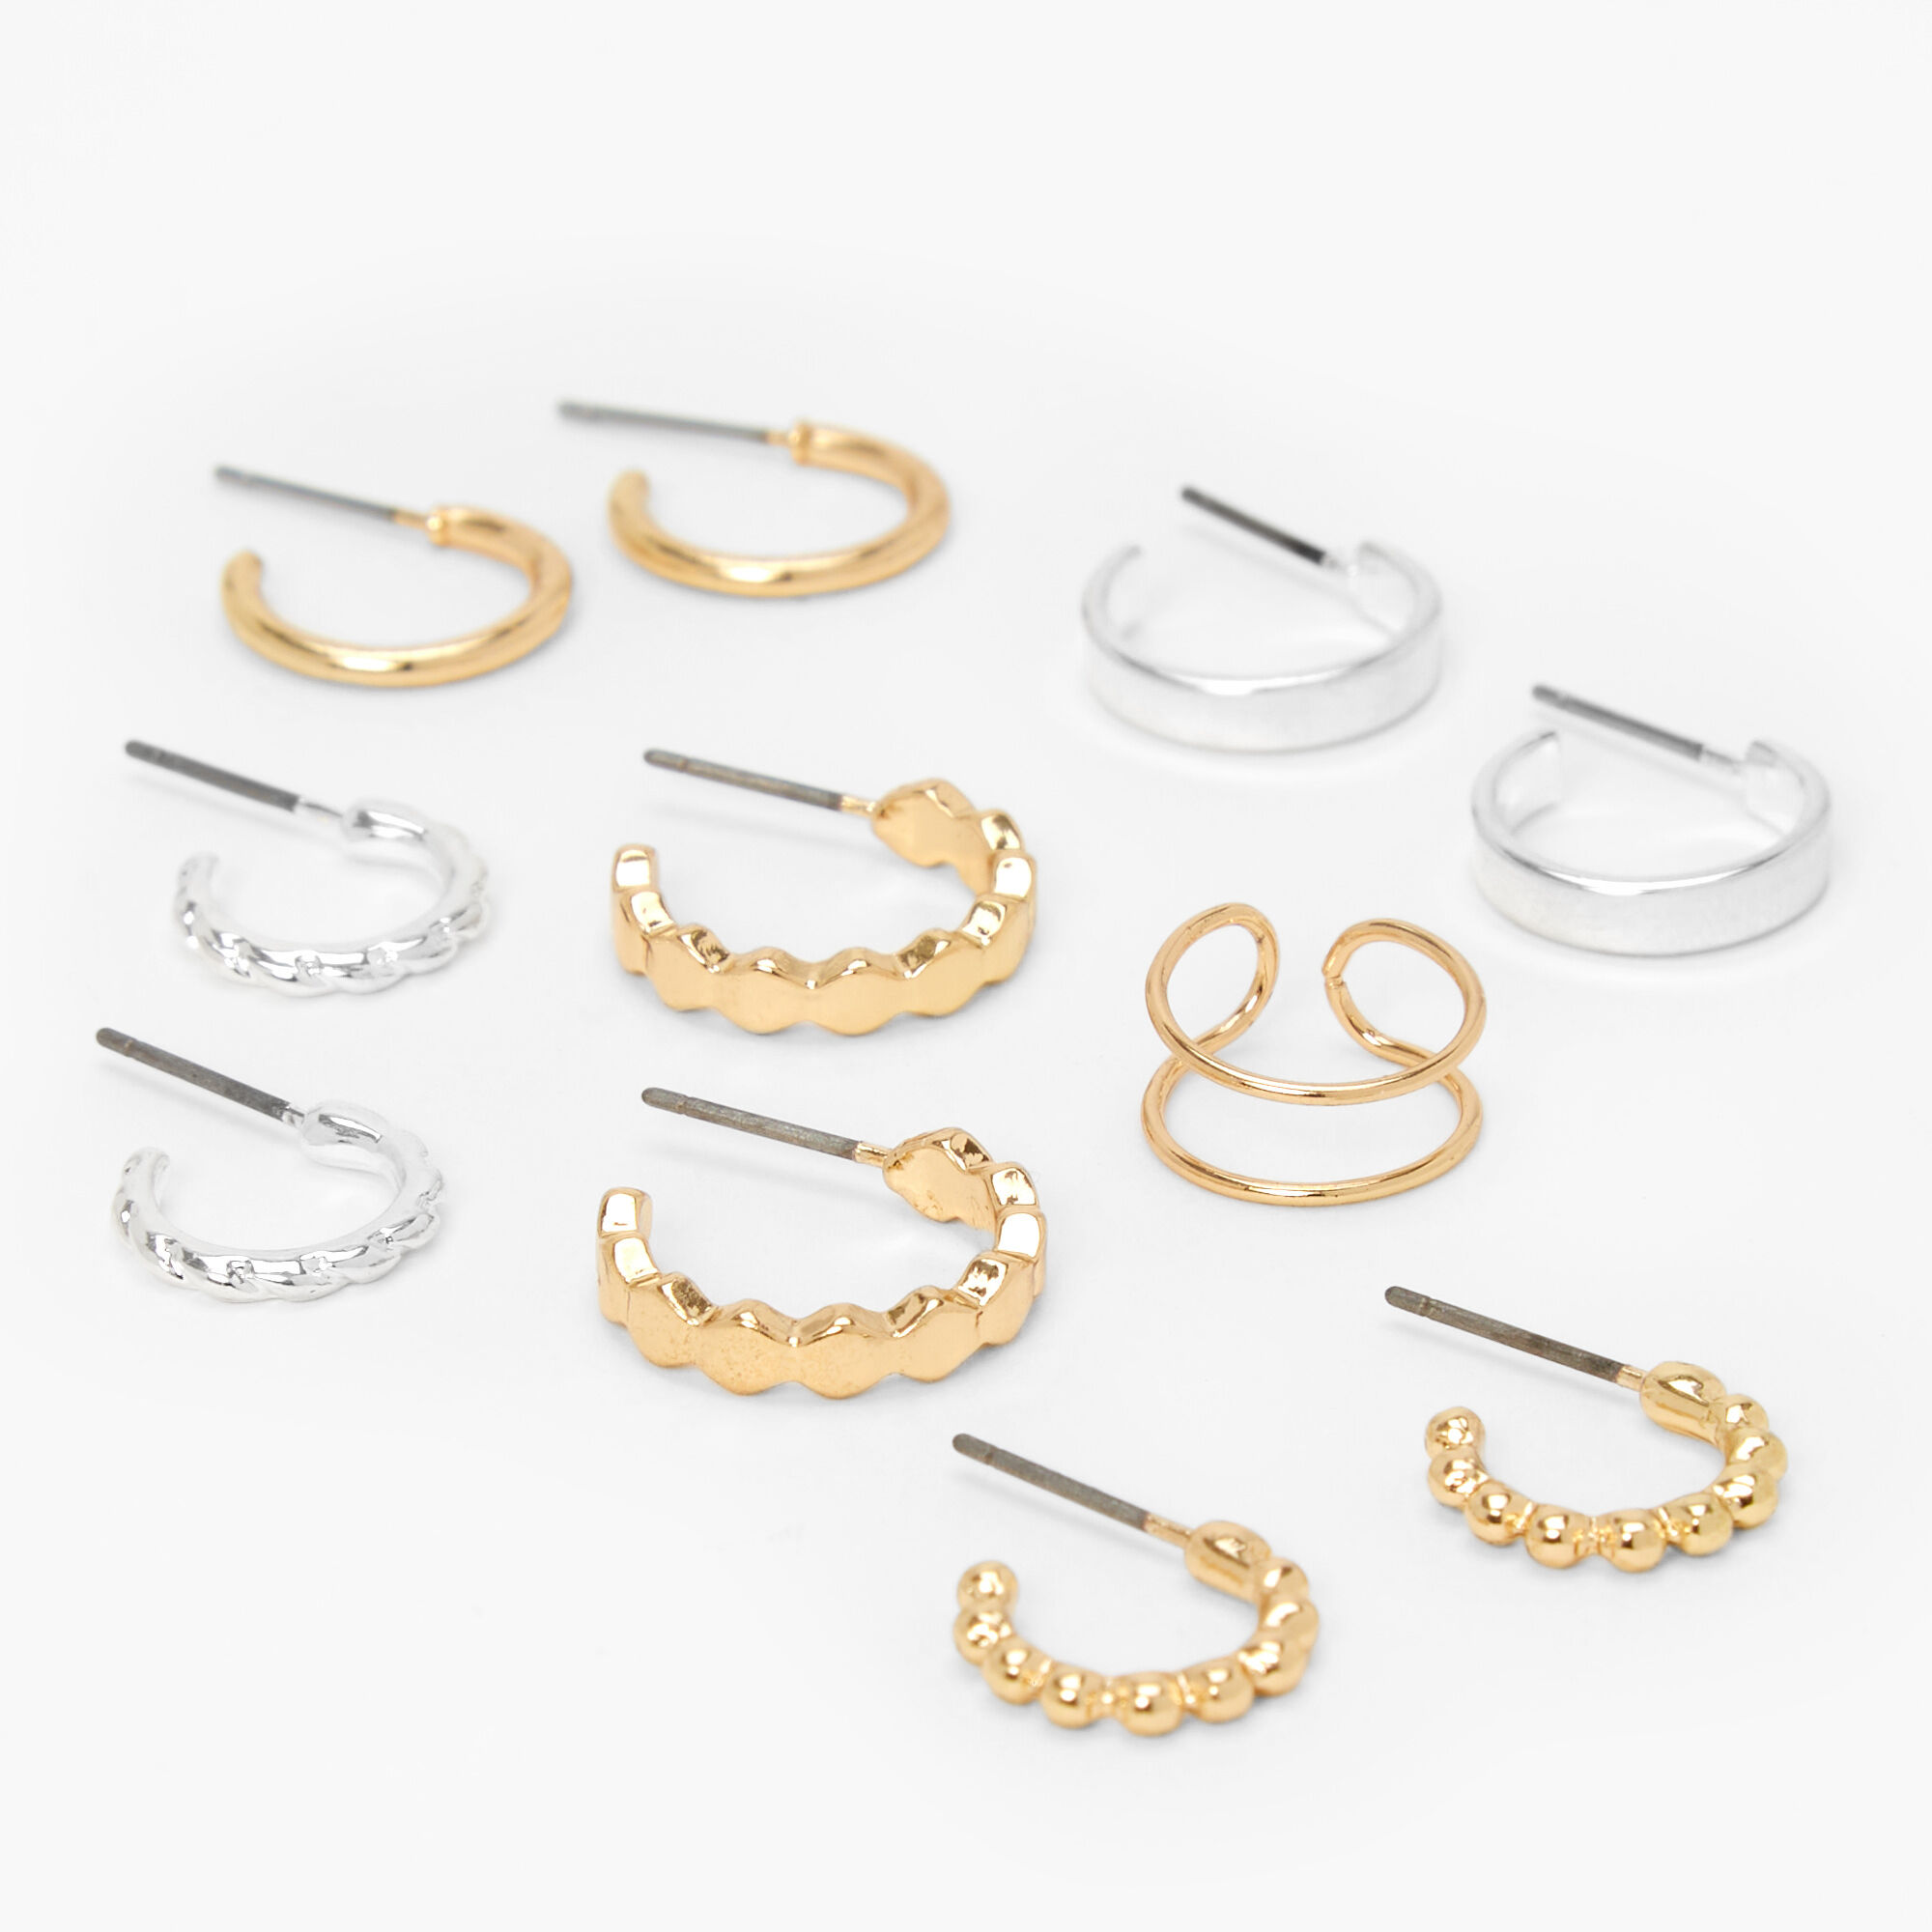 View Claires Mixed Metal Hoops Cuff Earring Set 6 Pack Gold information